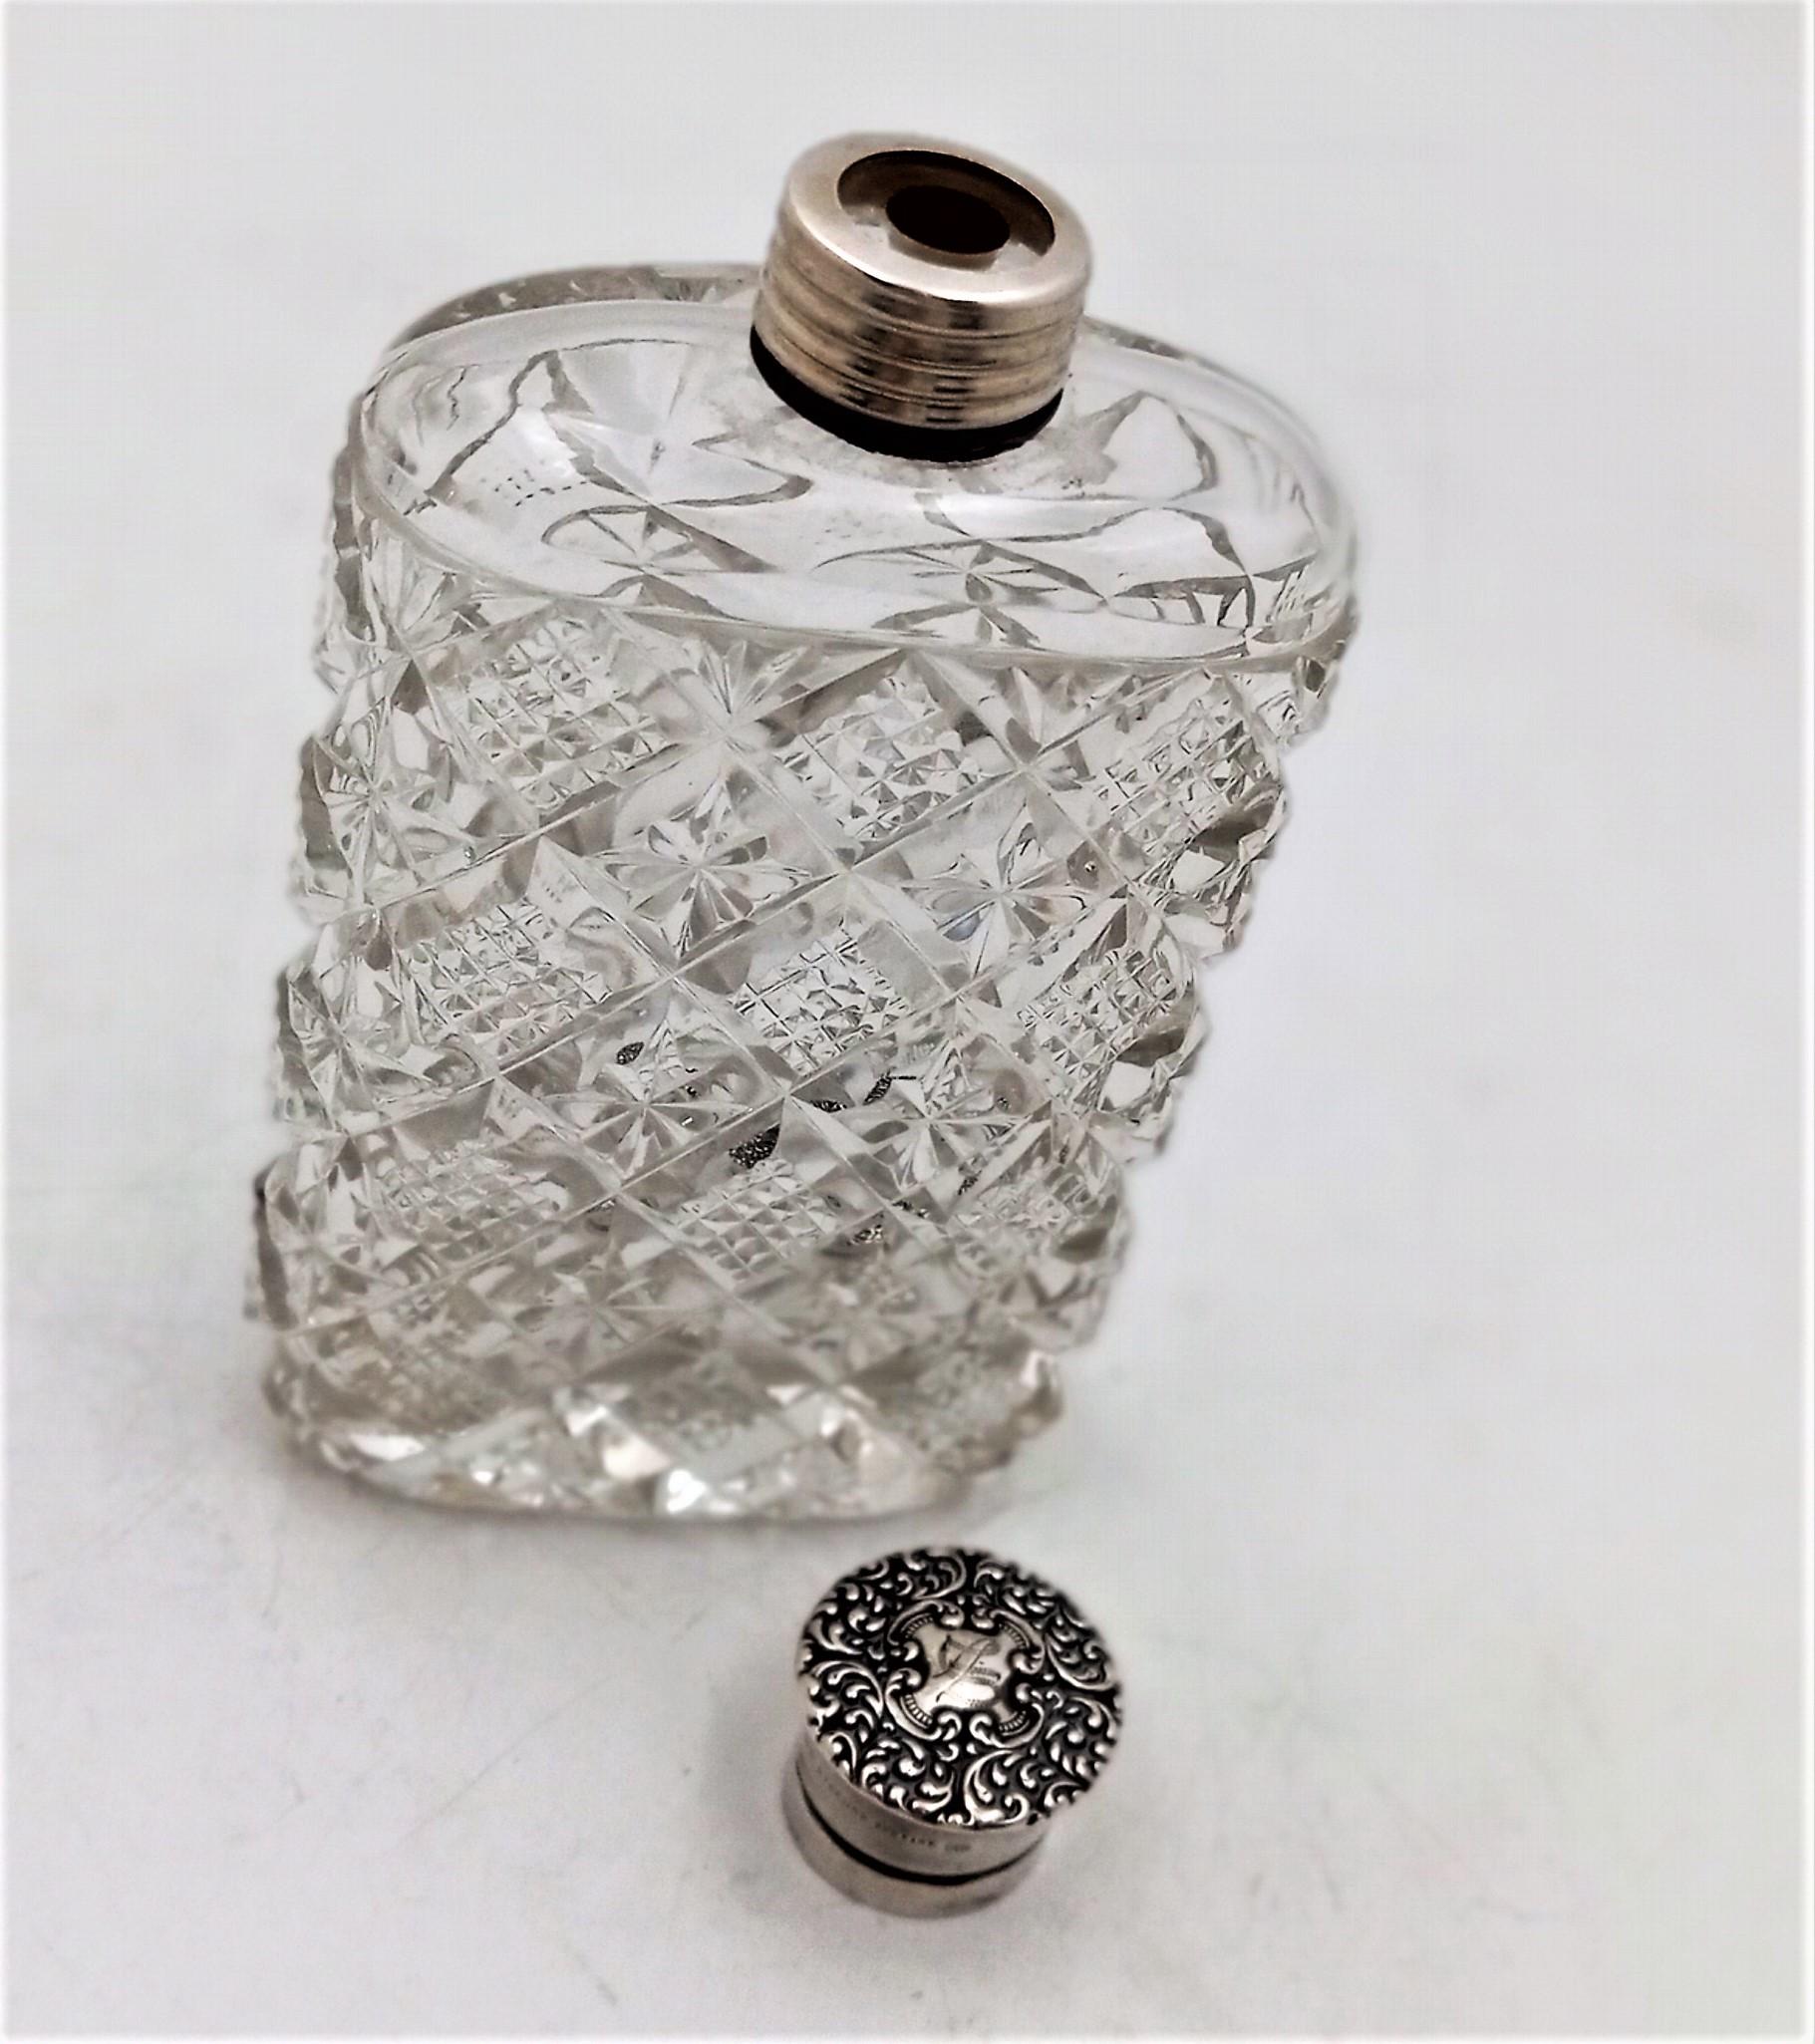 Cut glass Blackinton flask with sterling silver cap, circa 1920s. This elegant piece stands 5 1/2